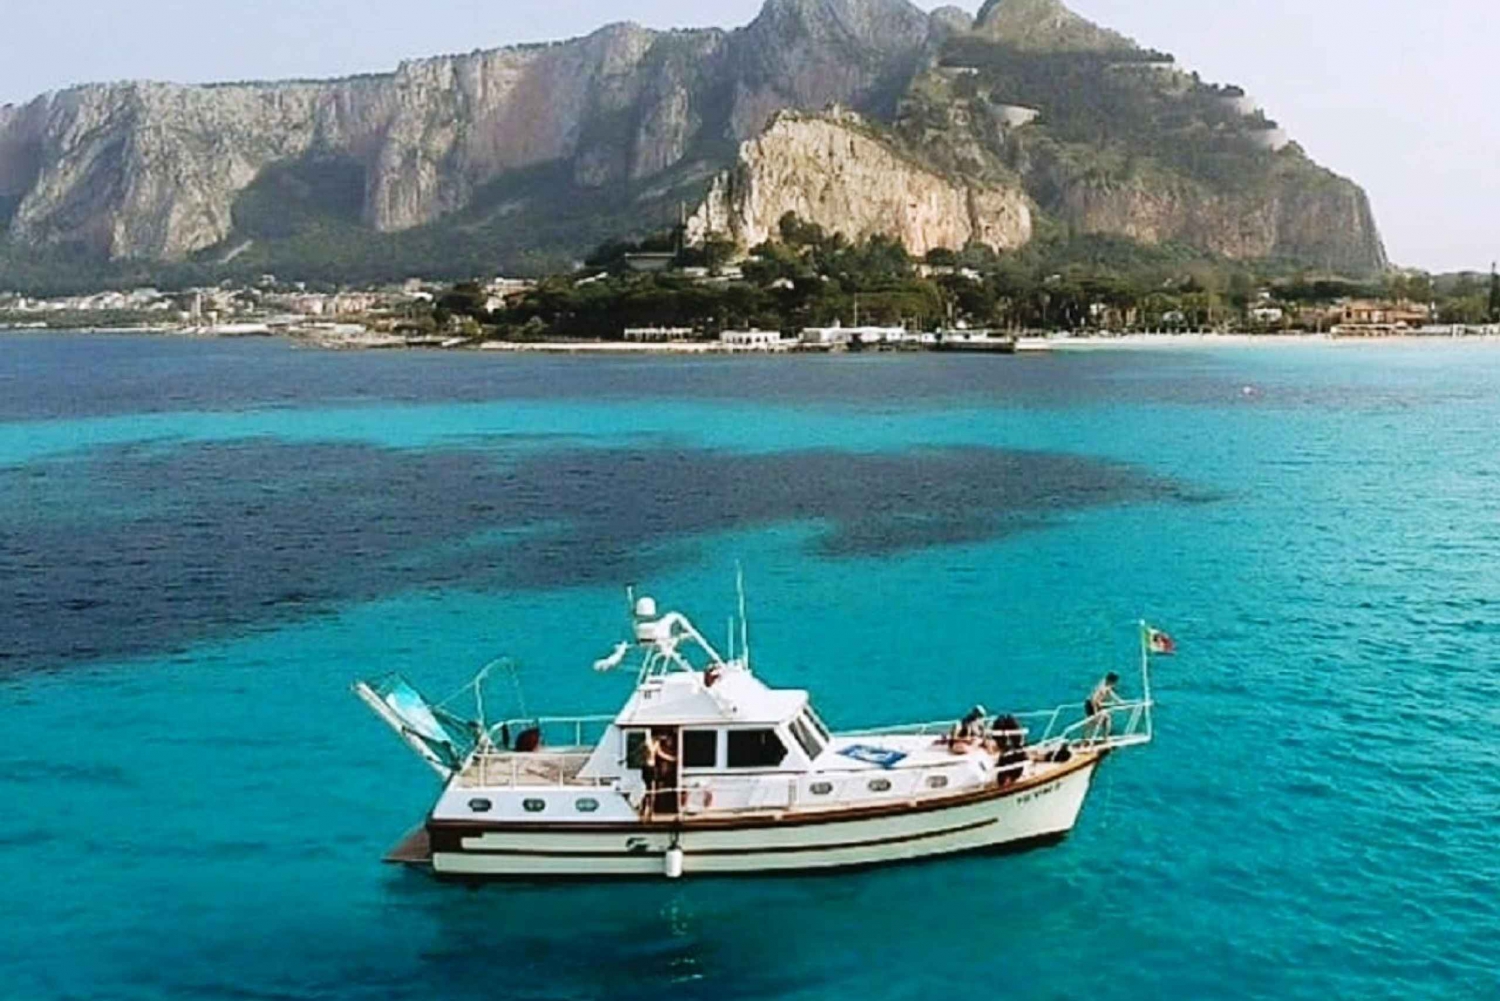 Palermo: tour in luxury yacht with bbq and drinks